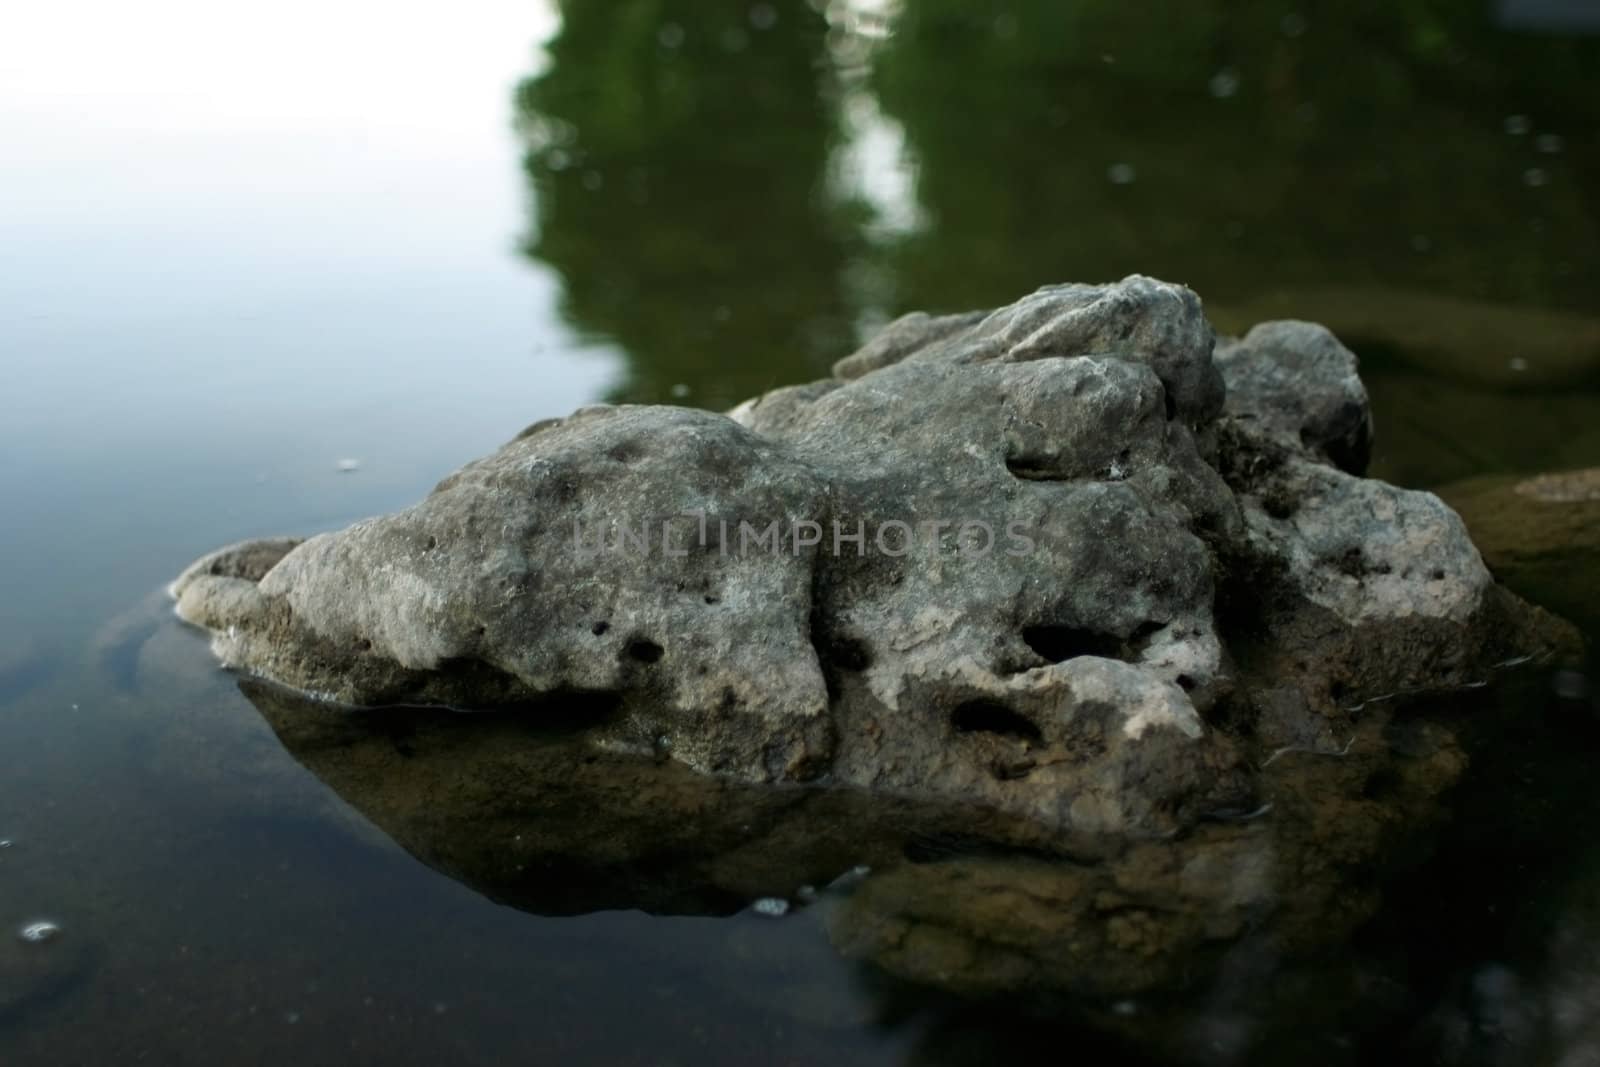 Simple rock poking out of the lake